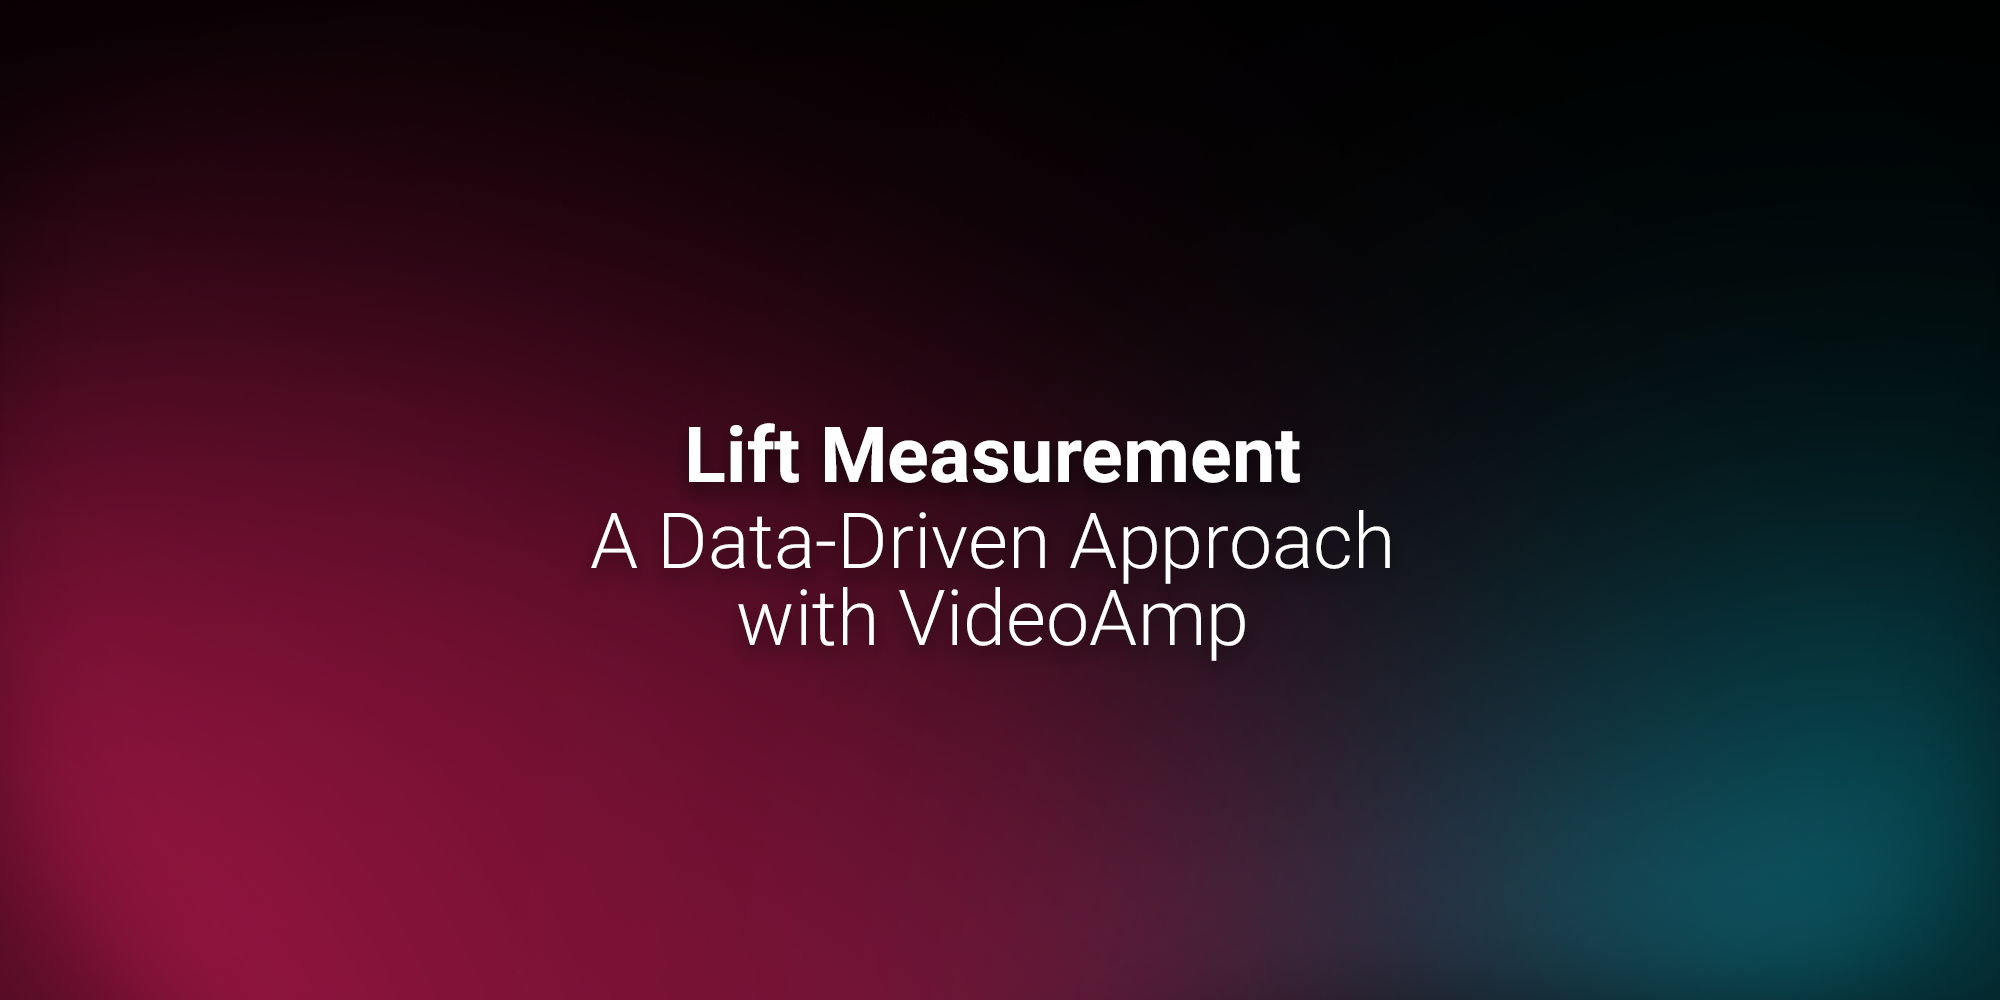 Lift Measurement Now Available within the VideoAmp Platform